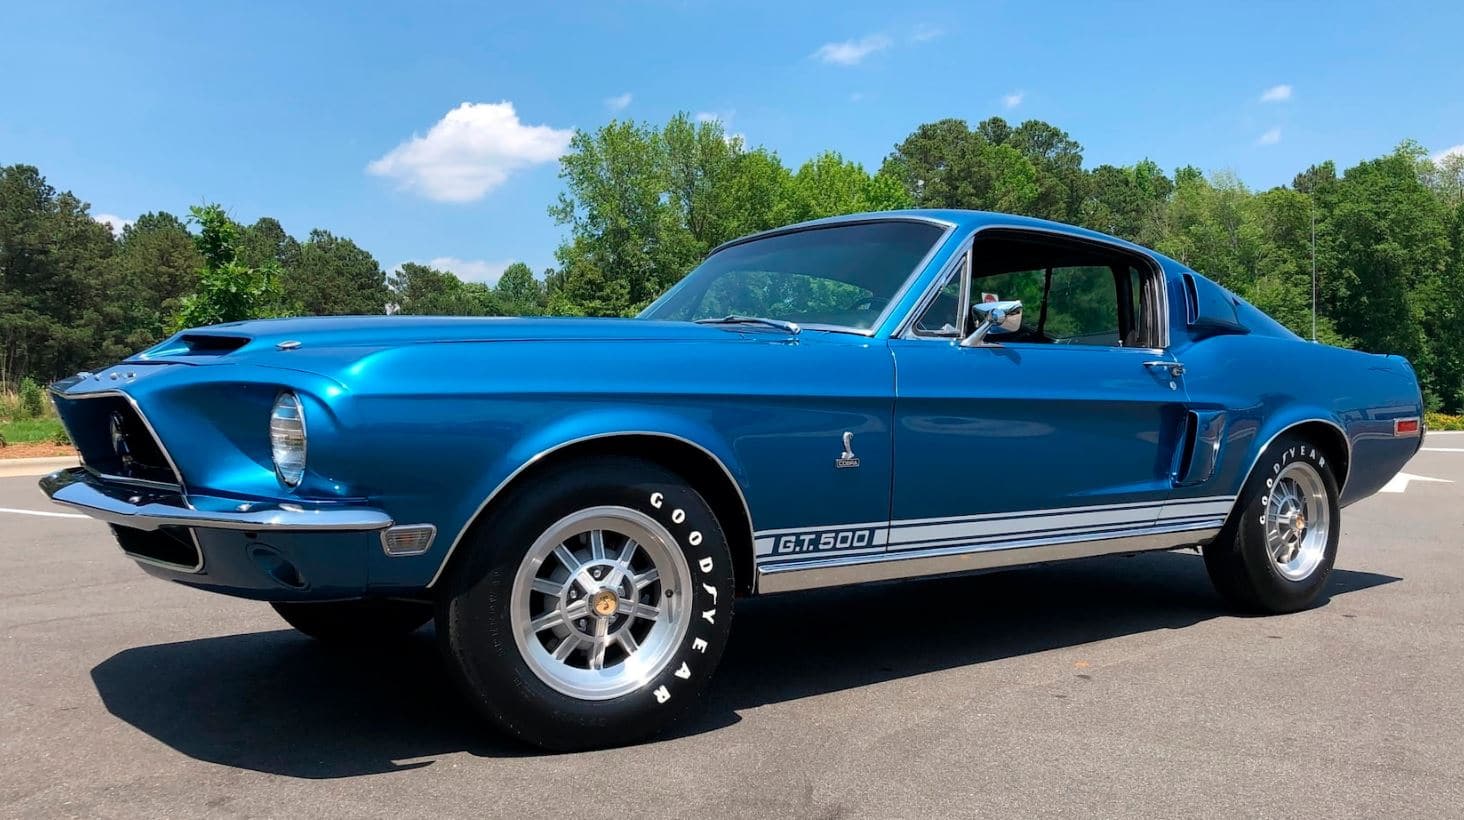 1968 SHELBY GT500 FASTBACK